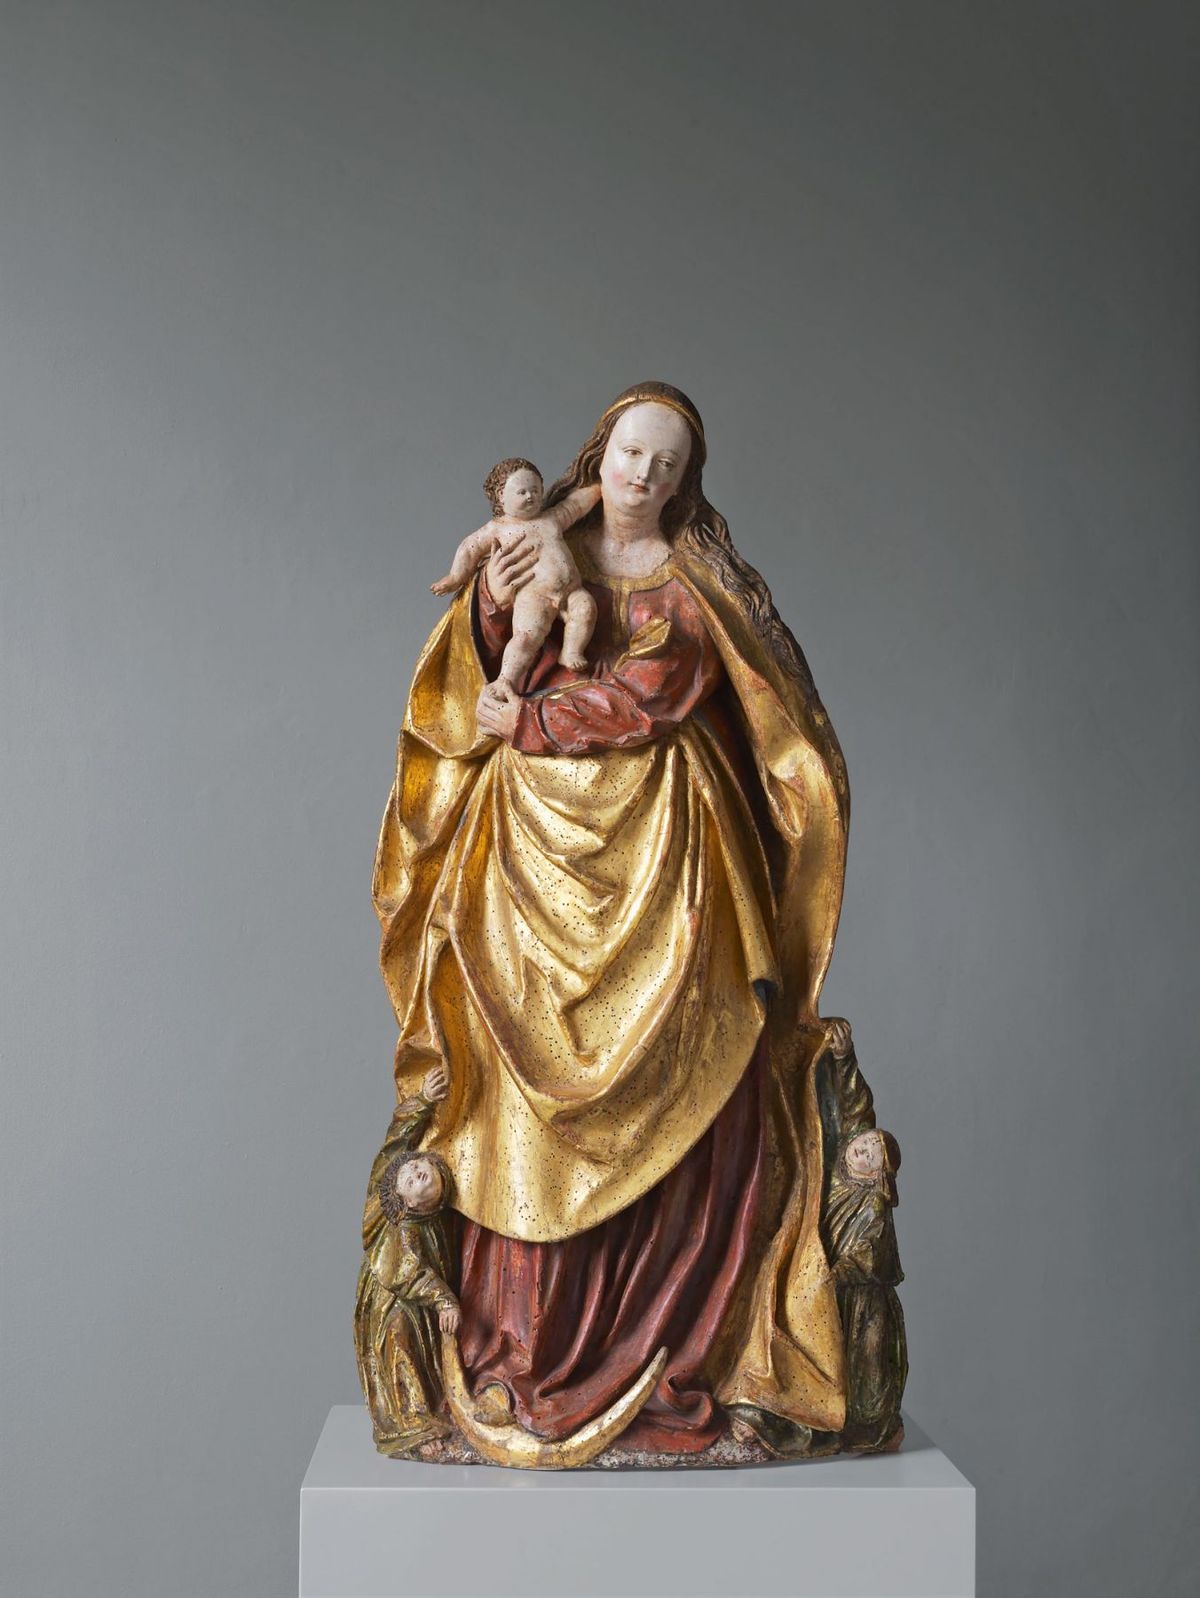 Virgin and Child with Angels from Lower Bavaria (around 1520) courtesy of Sam Fogg, London and Luhring Augustine, New York